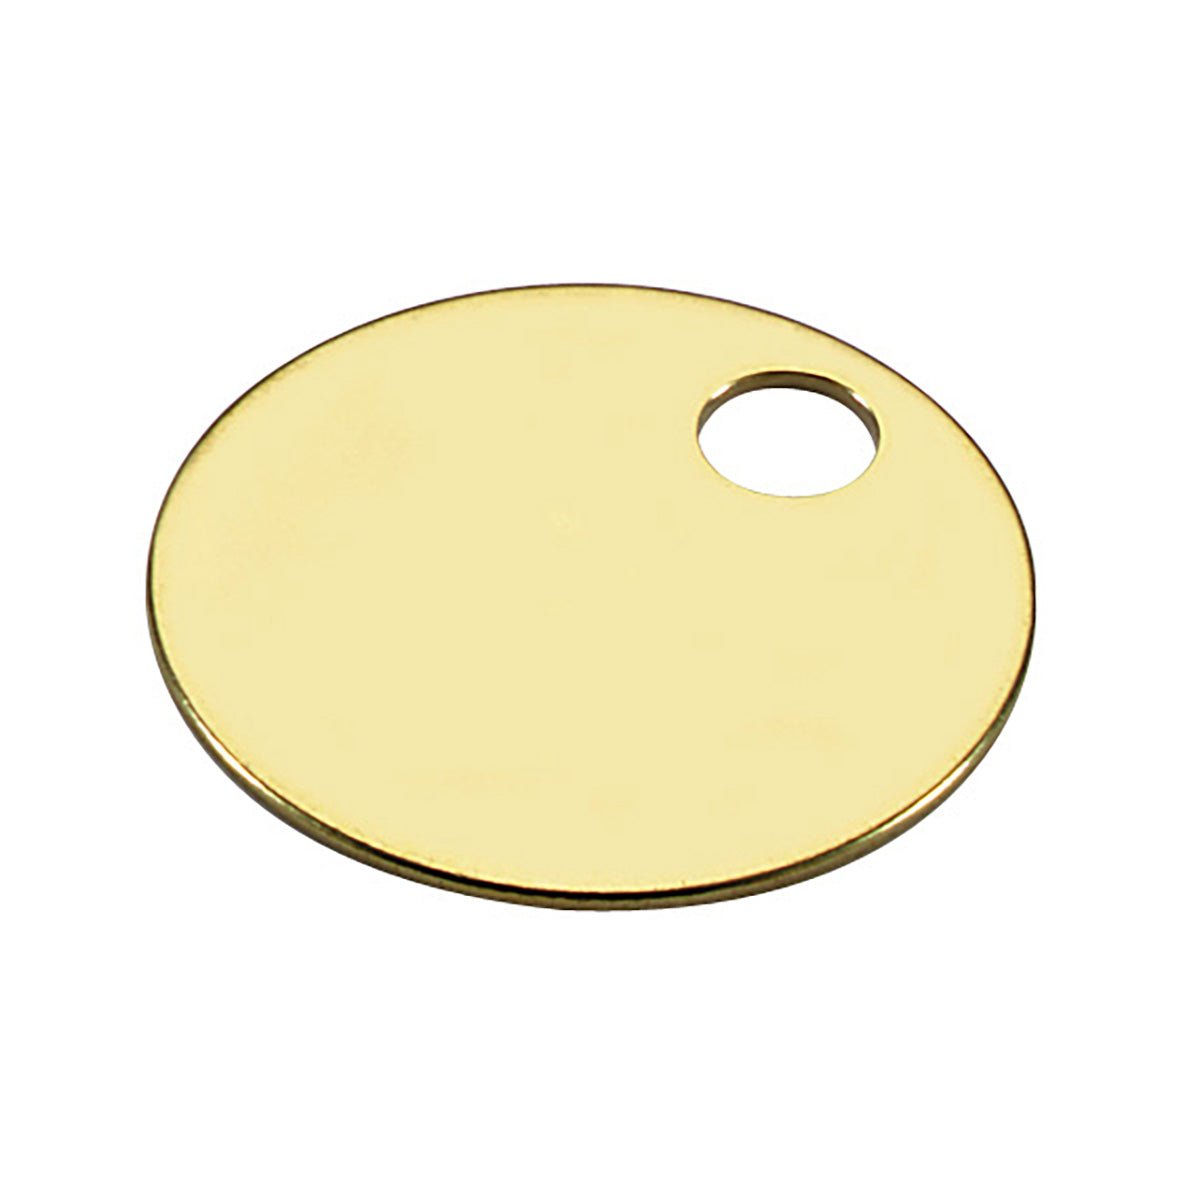 100-PACK Solid Brass Tags ONE HOLE 1-1/4 Disp Box (LUCKY LINE)